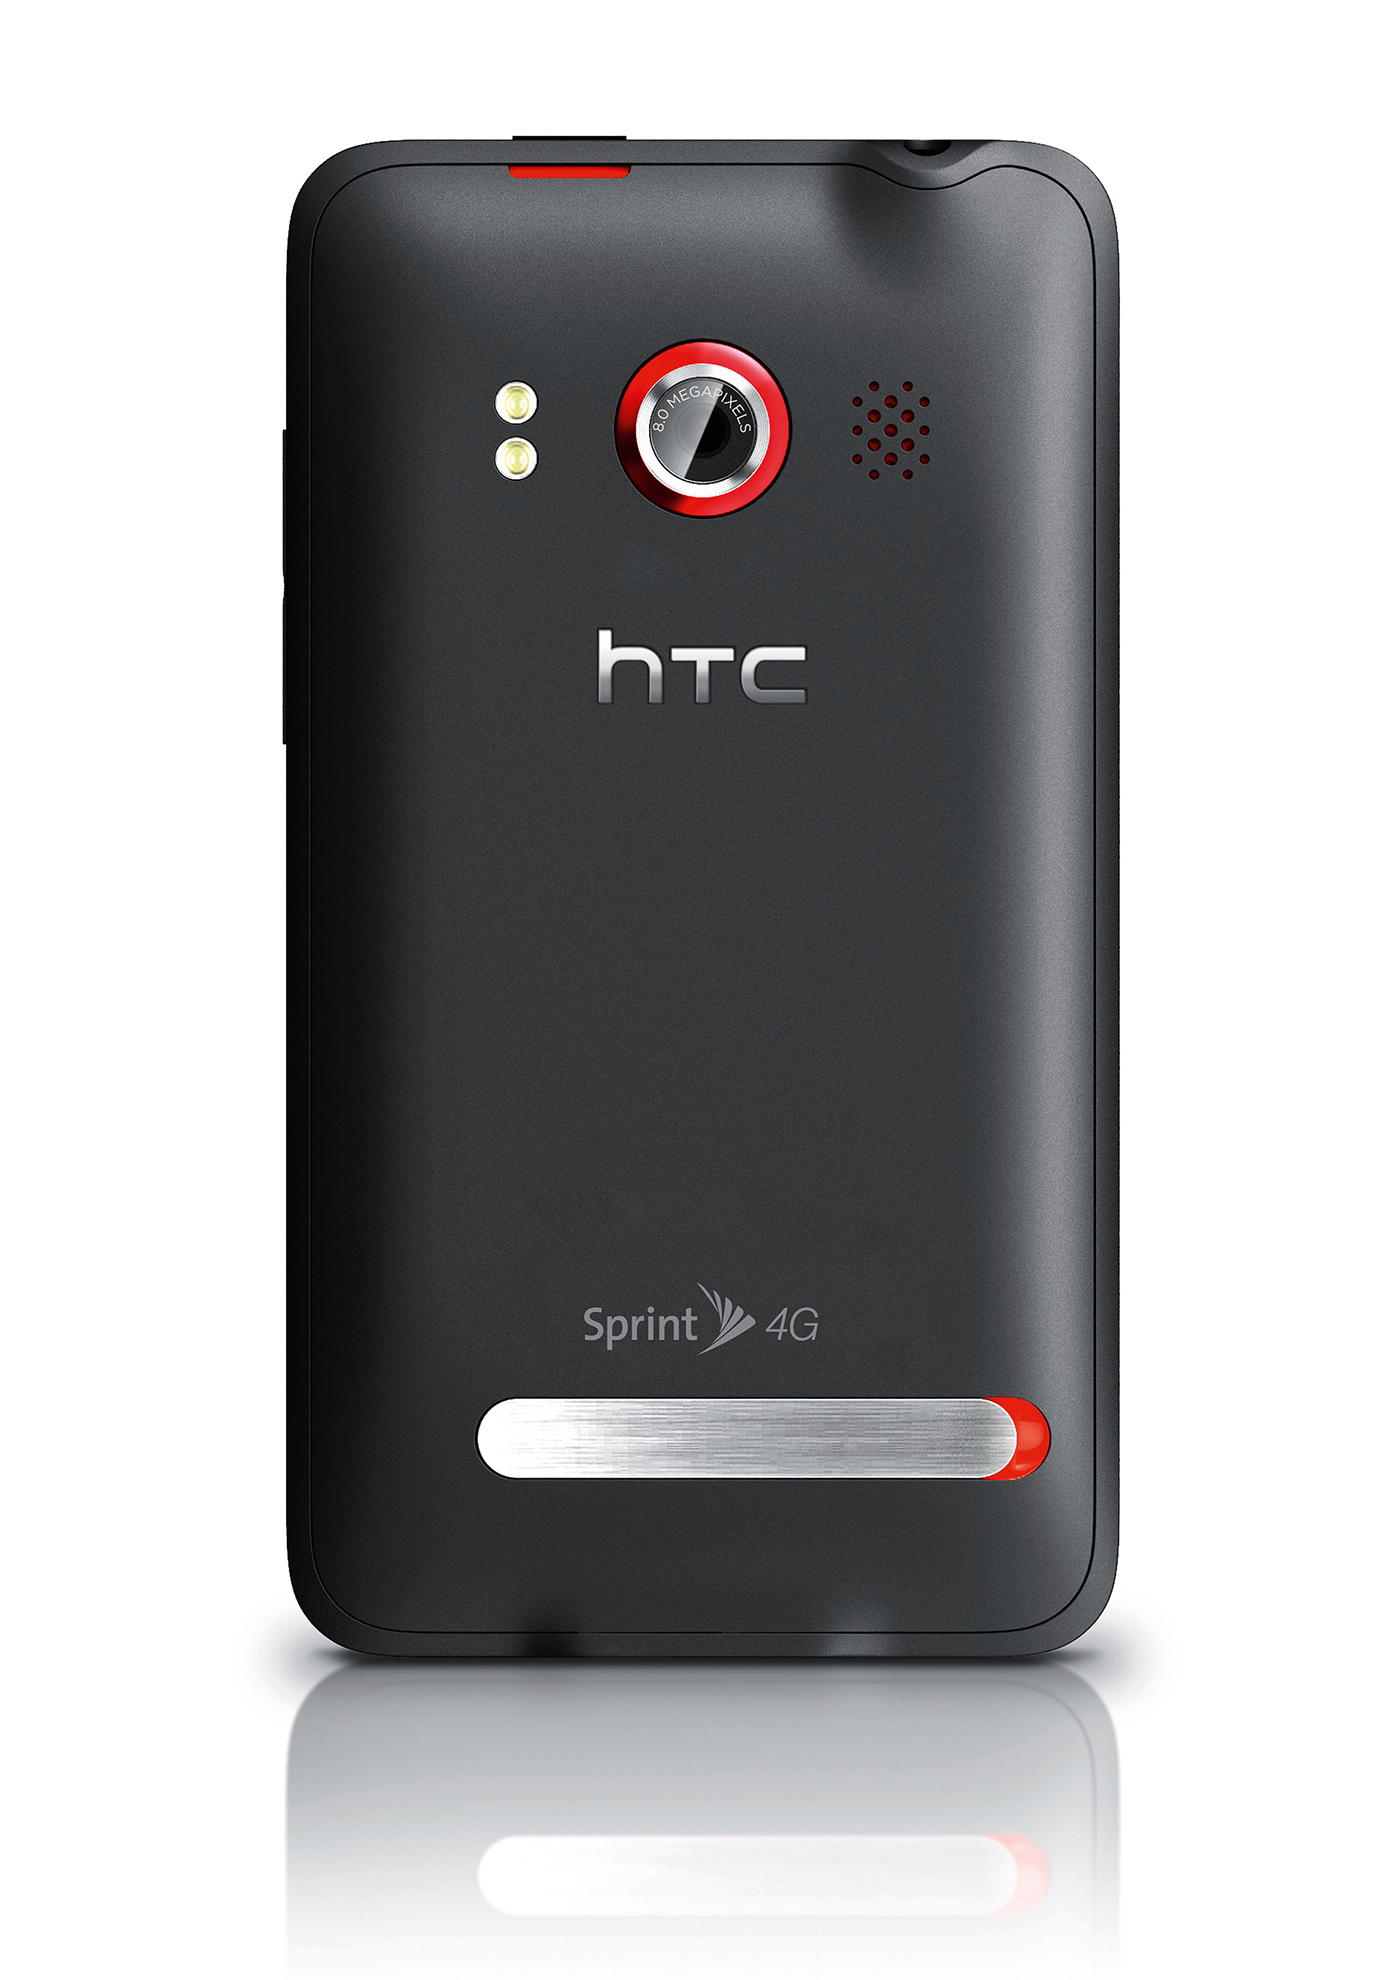 htc Evo phone Electronics Consumer andriod 4g one & co san francisco taiwan singapore pro engineer Rhino mobile Cell sprint kickstand touch